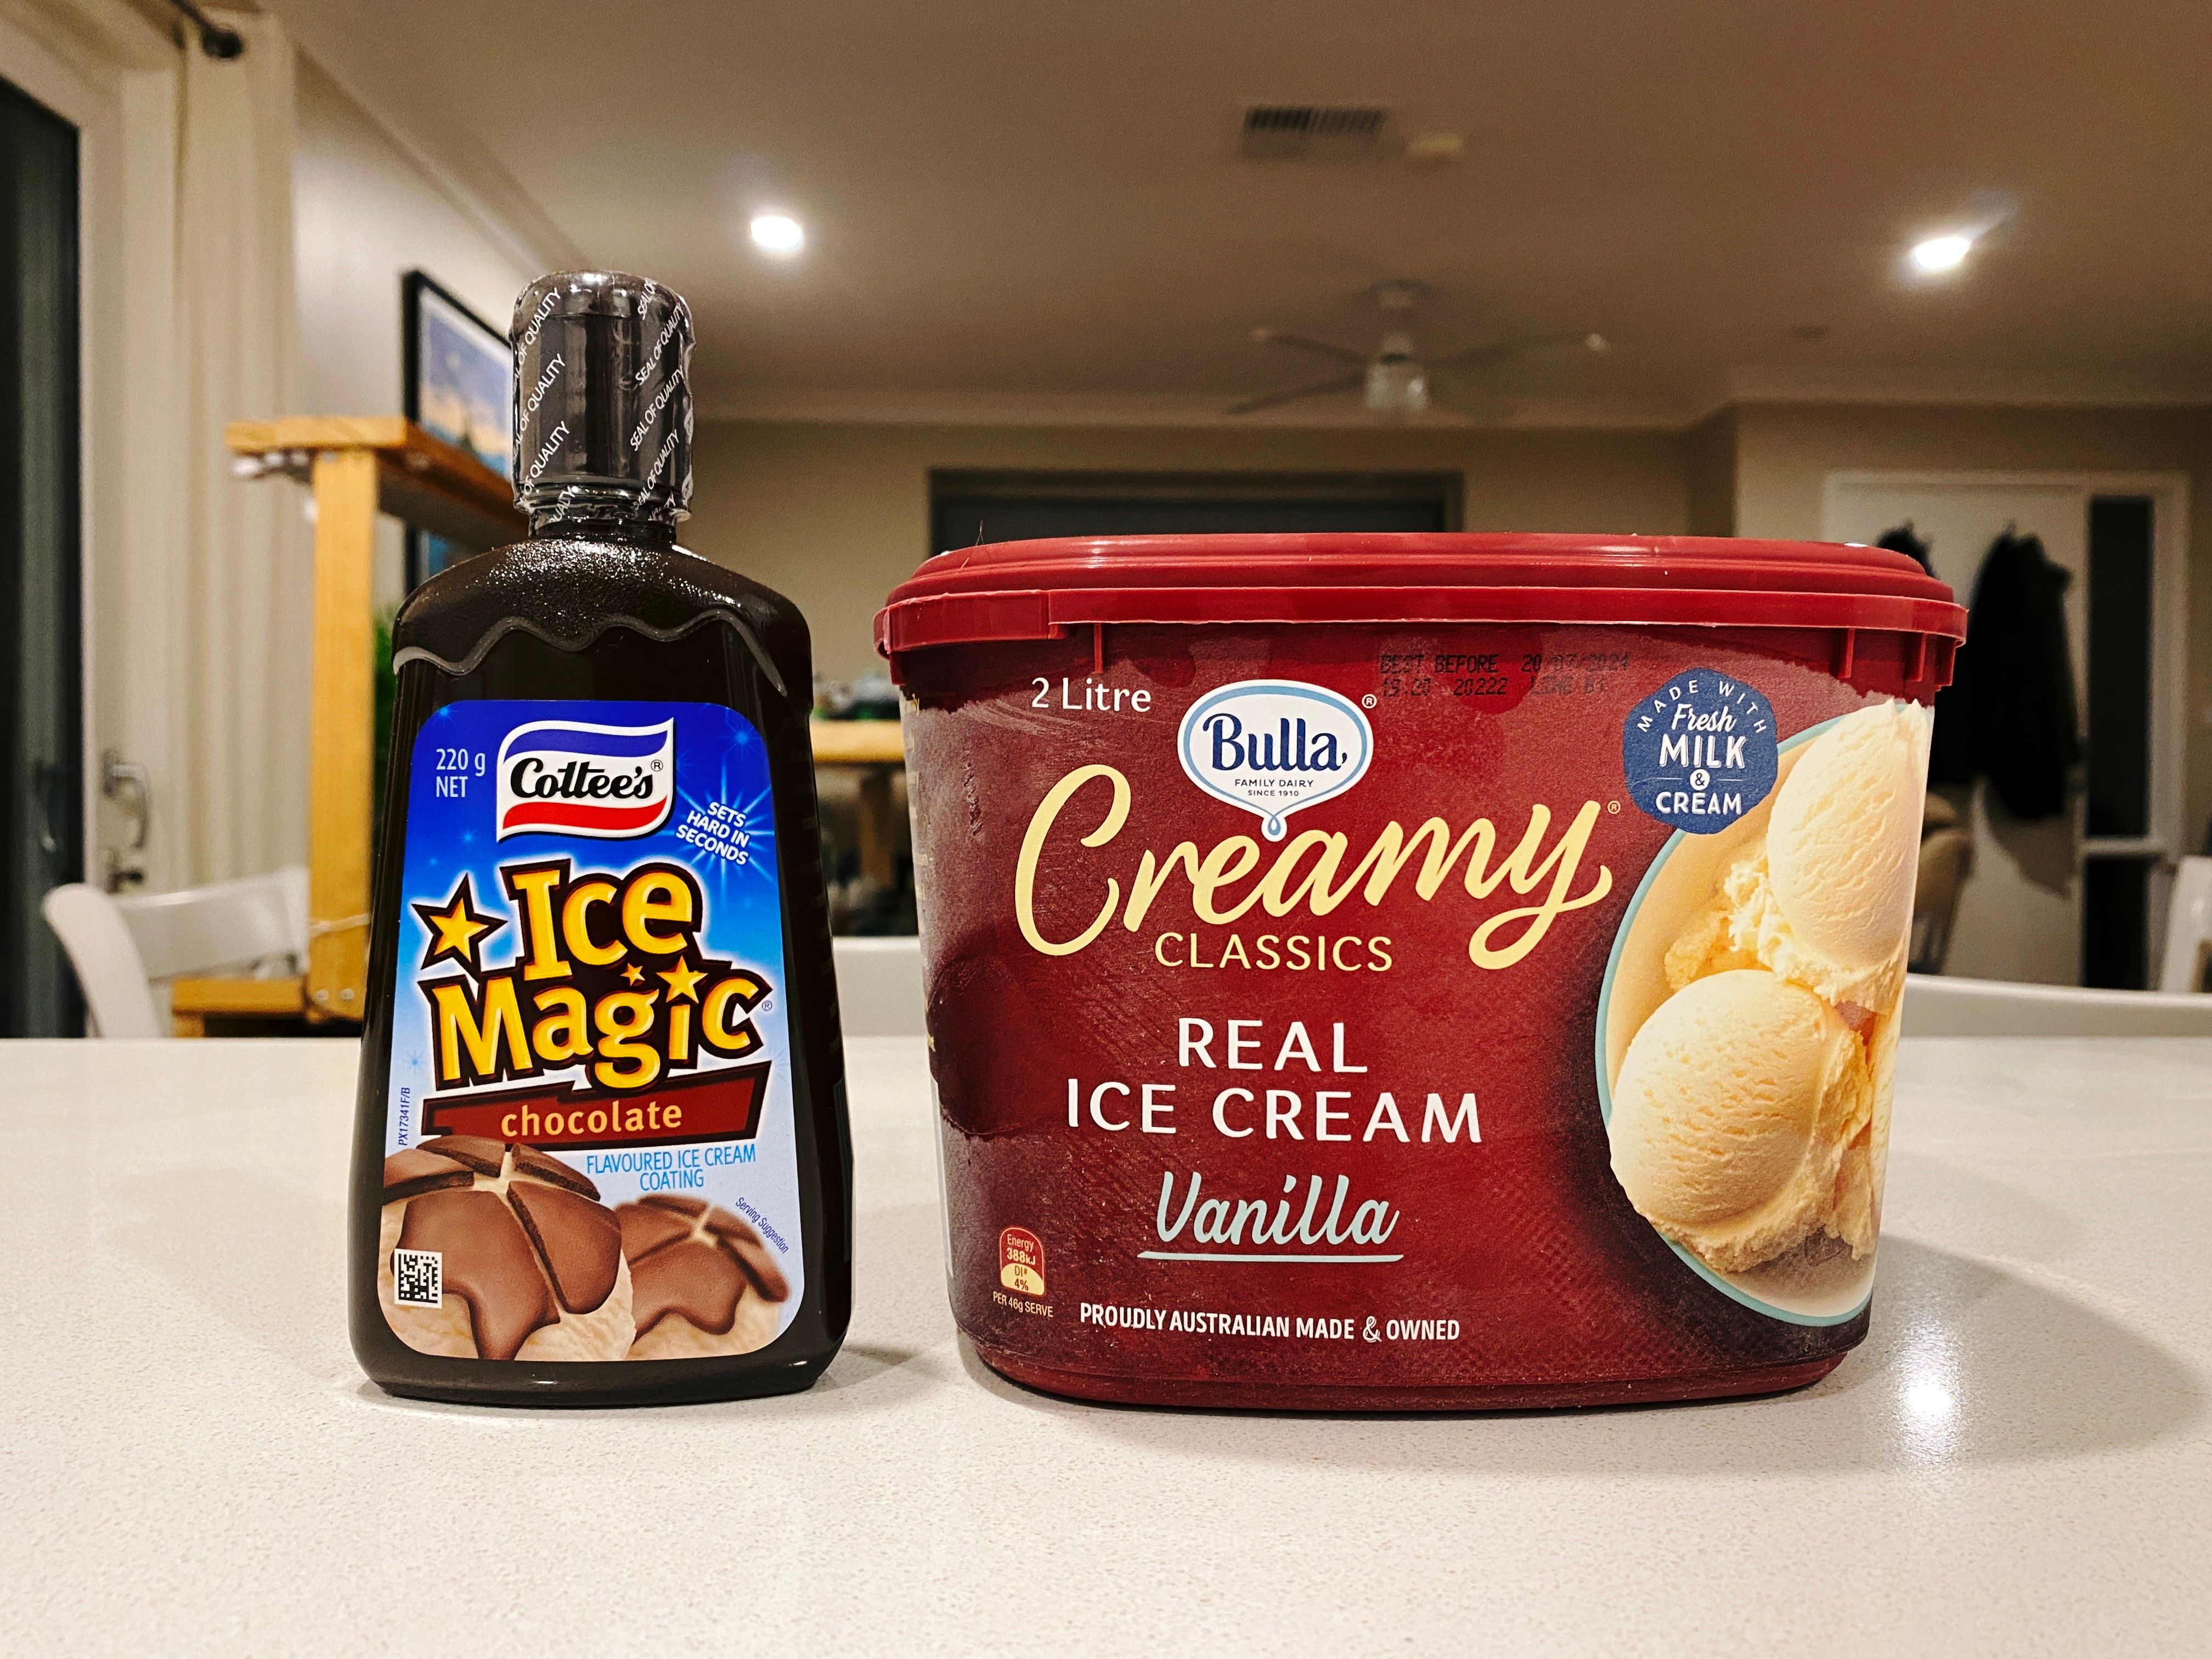 A photo of a two litre tub of Bulla vanilla ice cream and a bottle of Ice Magic chocolate ice cream topping (which Wikipedia helpfully informs me is called "Bird's Ice Magic" in the UK and "Magic Shell" in the US).